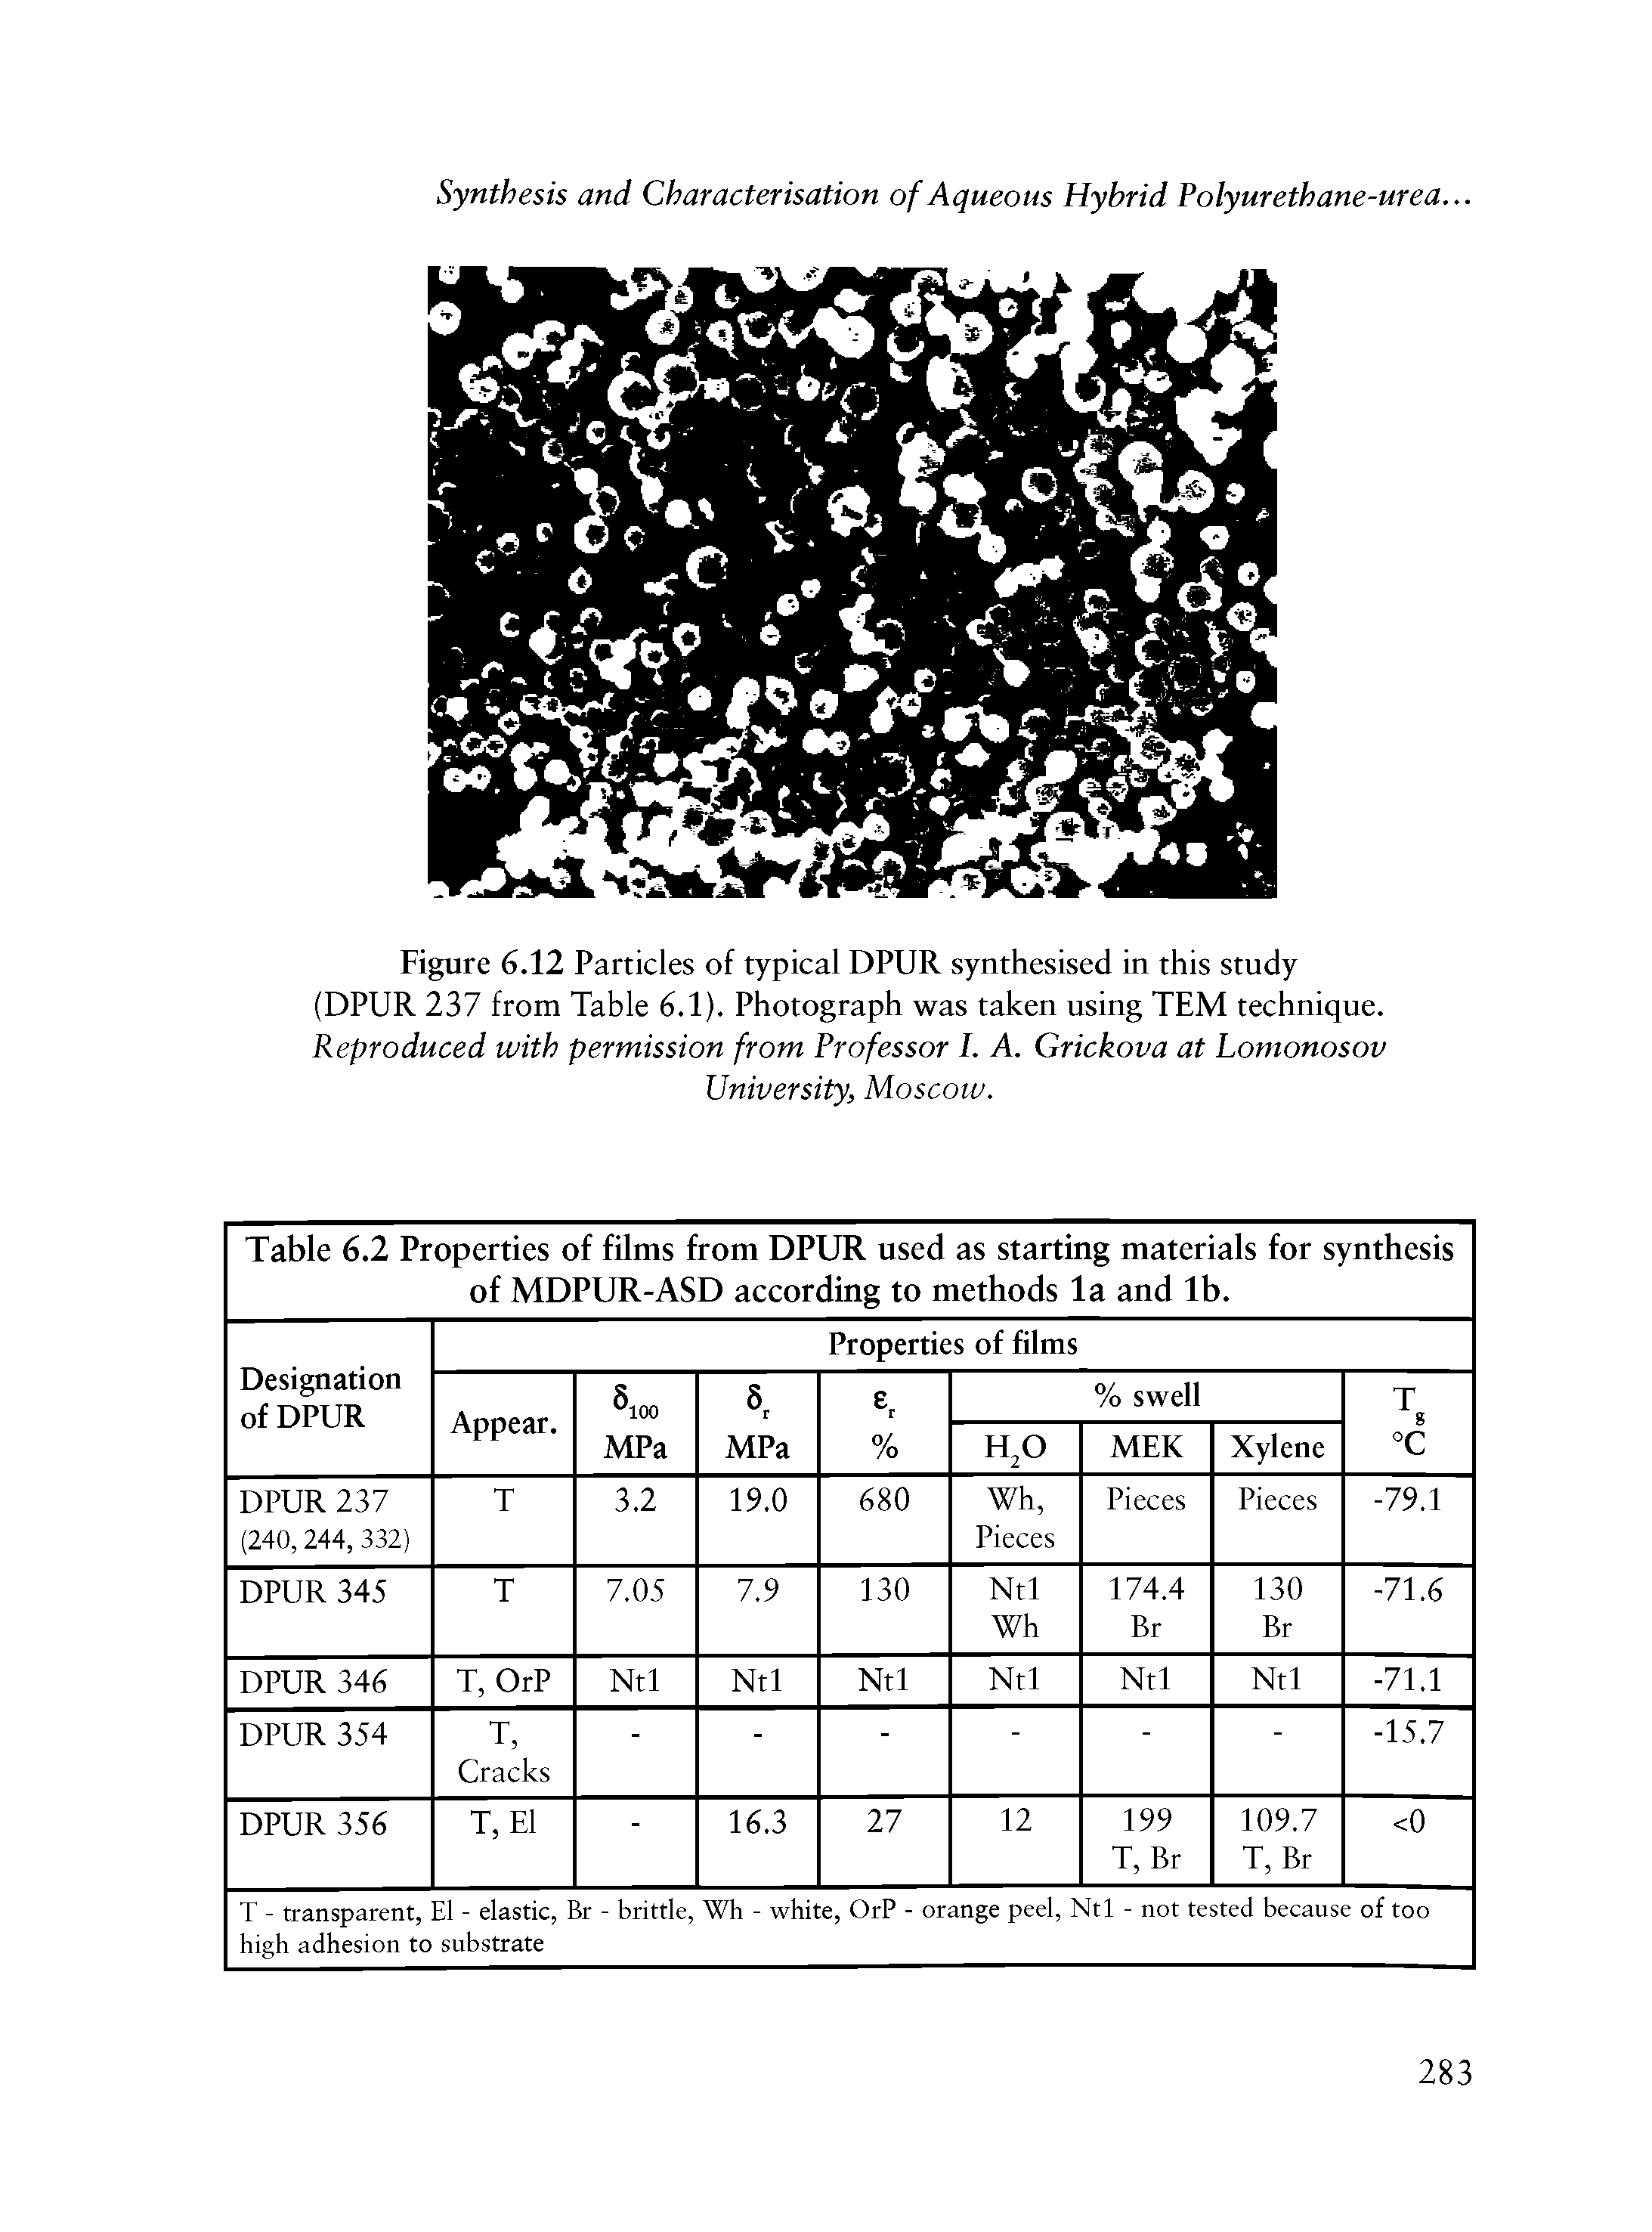 Figure 6.12 Particles of typical DPUR synthesised in this study (DPUR 237 from Table 6.1). Photograph was taken using TEM technique. Reproduced with permission from Professor I. A. Grickova at Lomonosov...